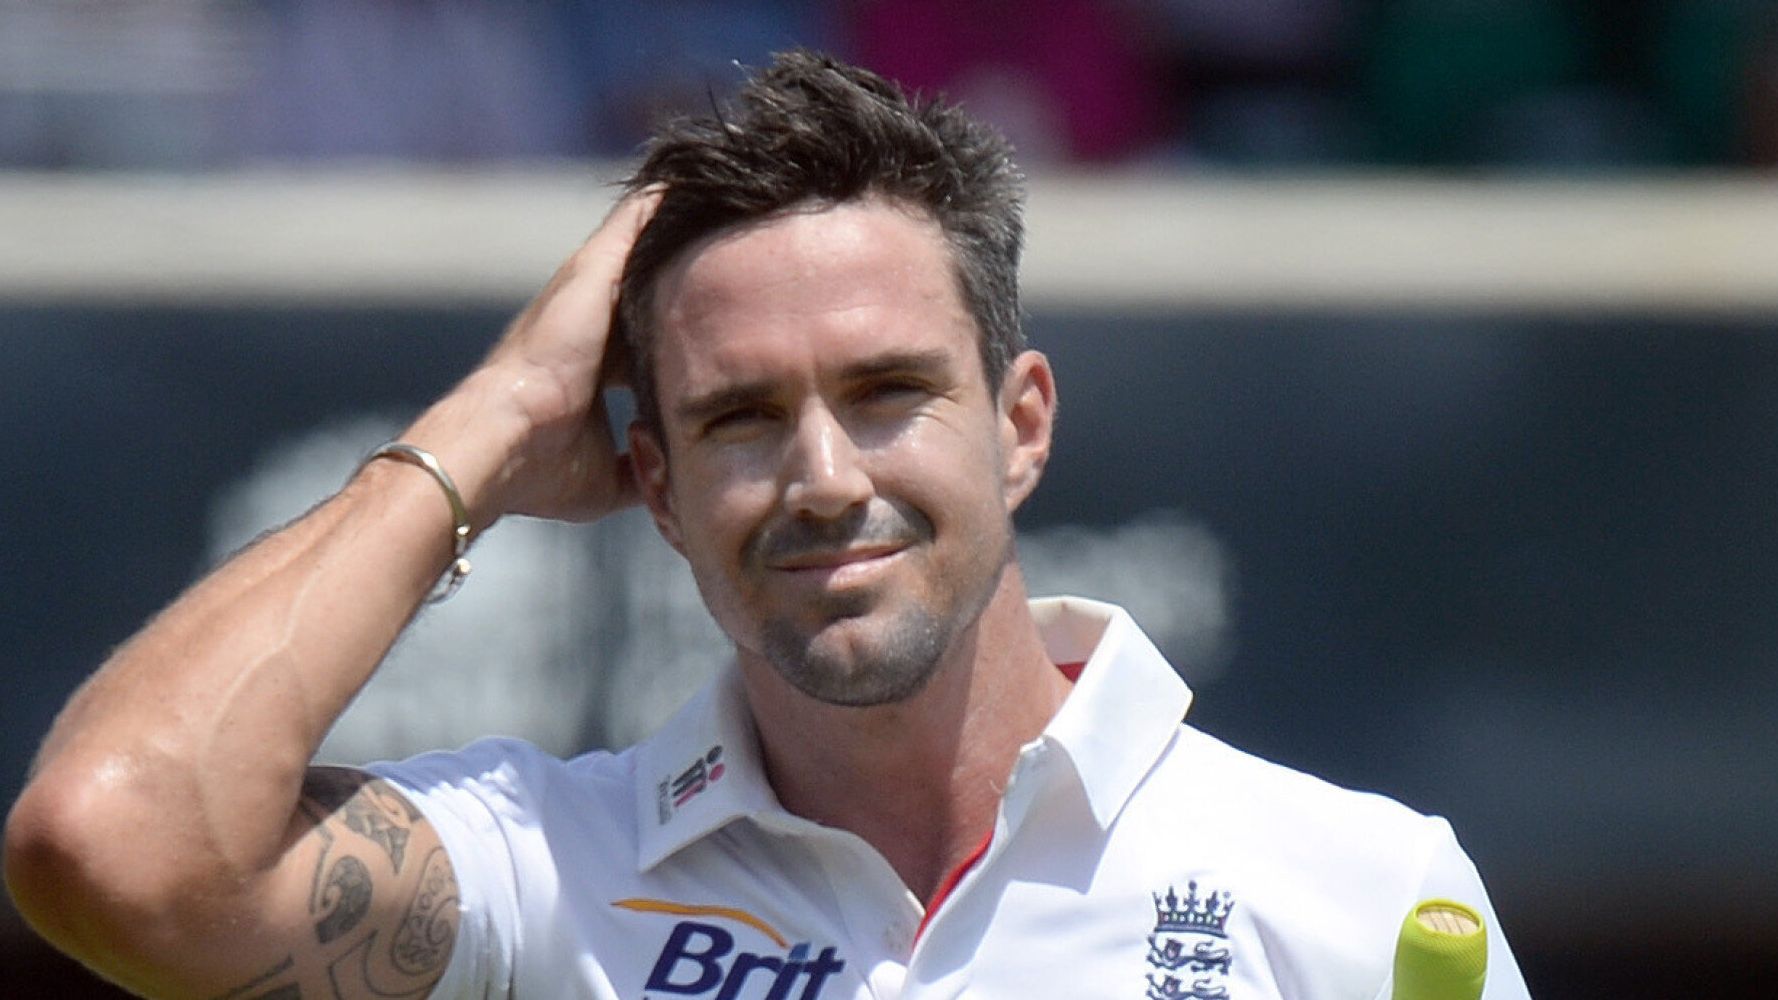 Kevin Pietersen's Blue Hair: The Story Behind the Color - wide 6